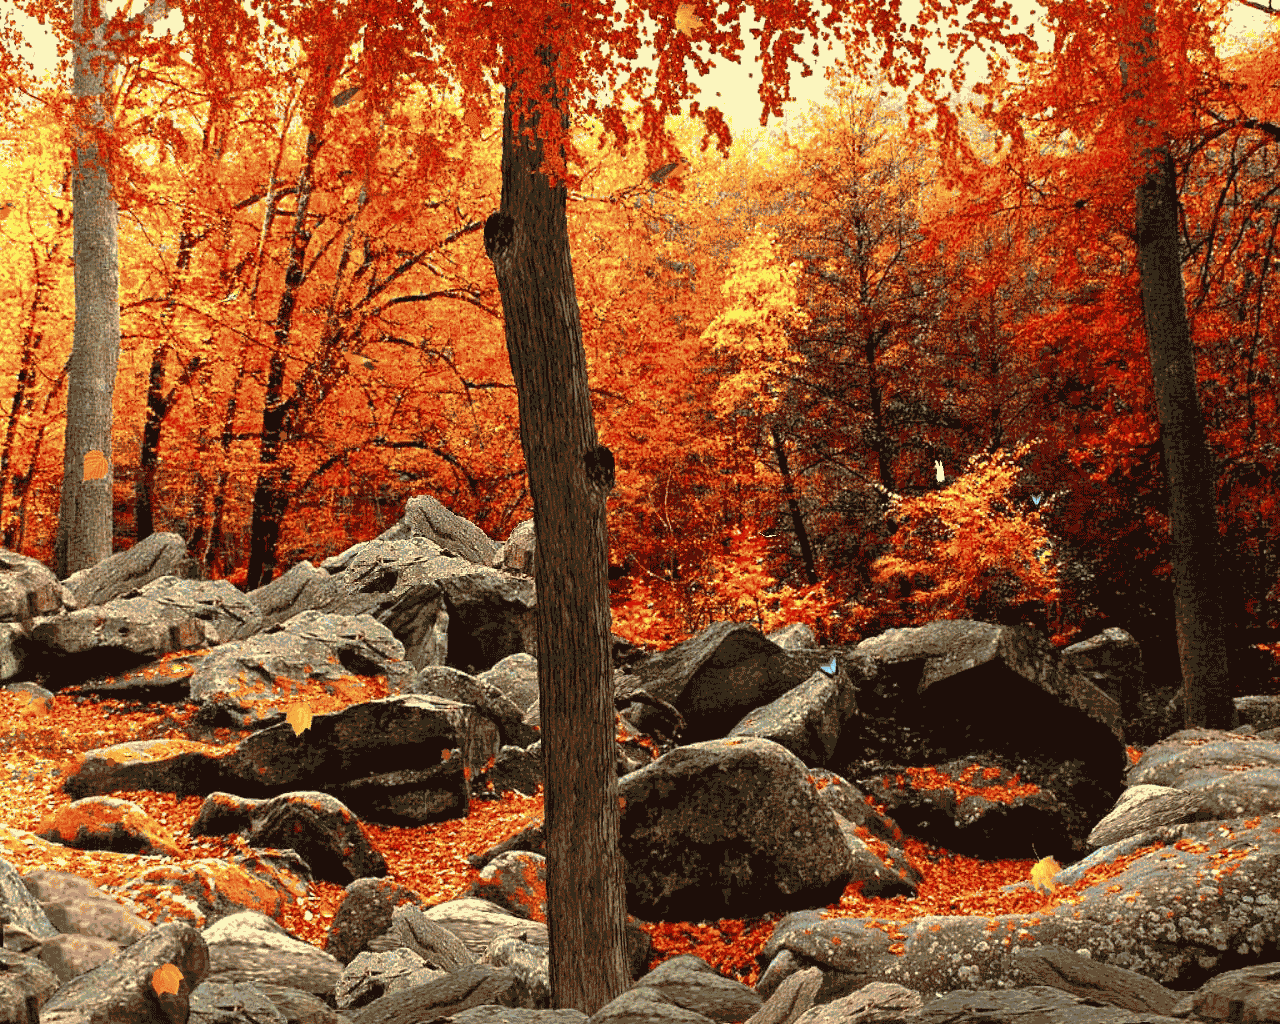 A tree surrounded by rocks and orange leaves. - Woods